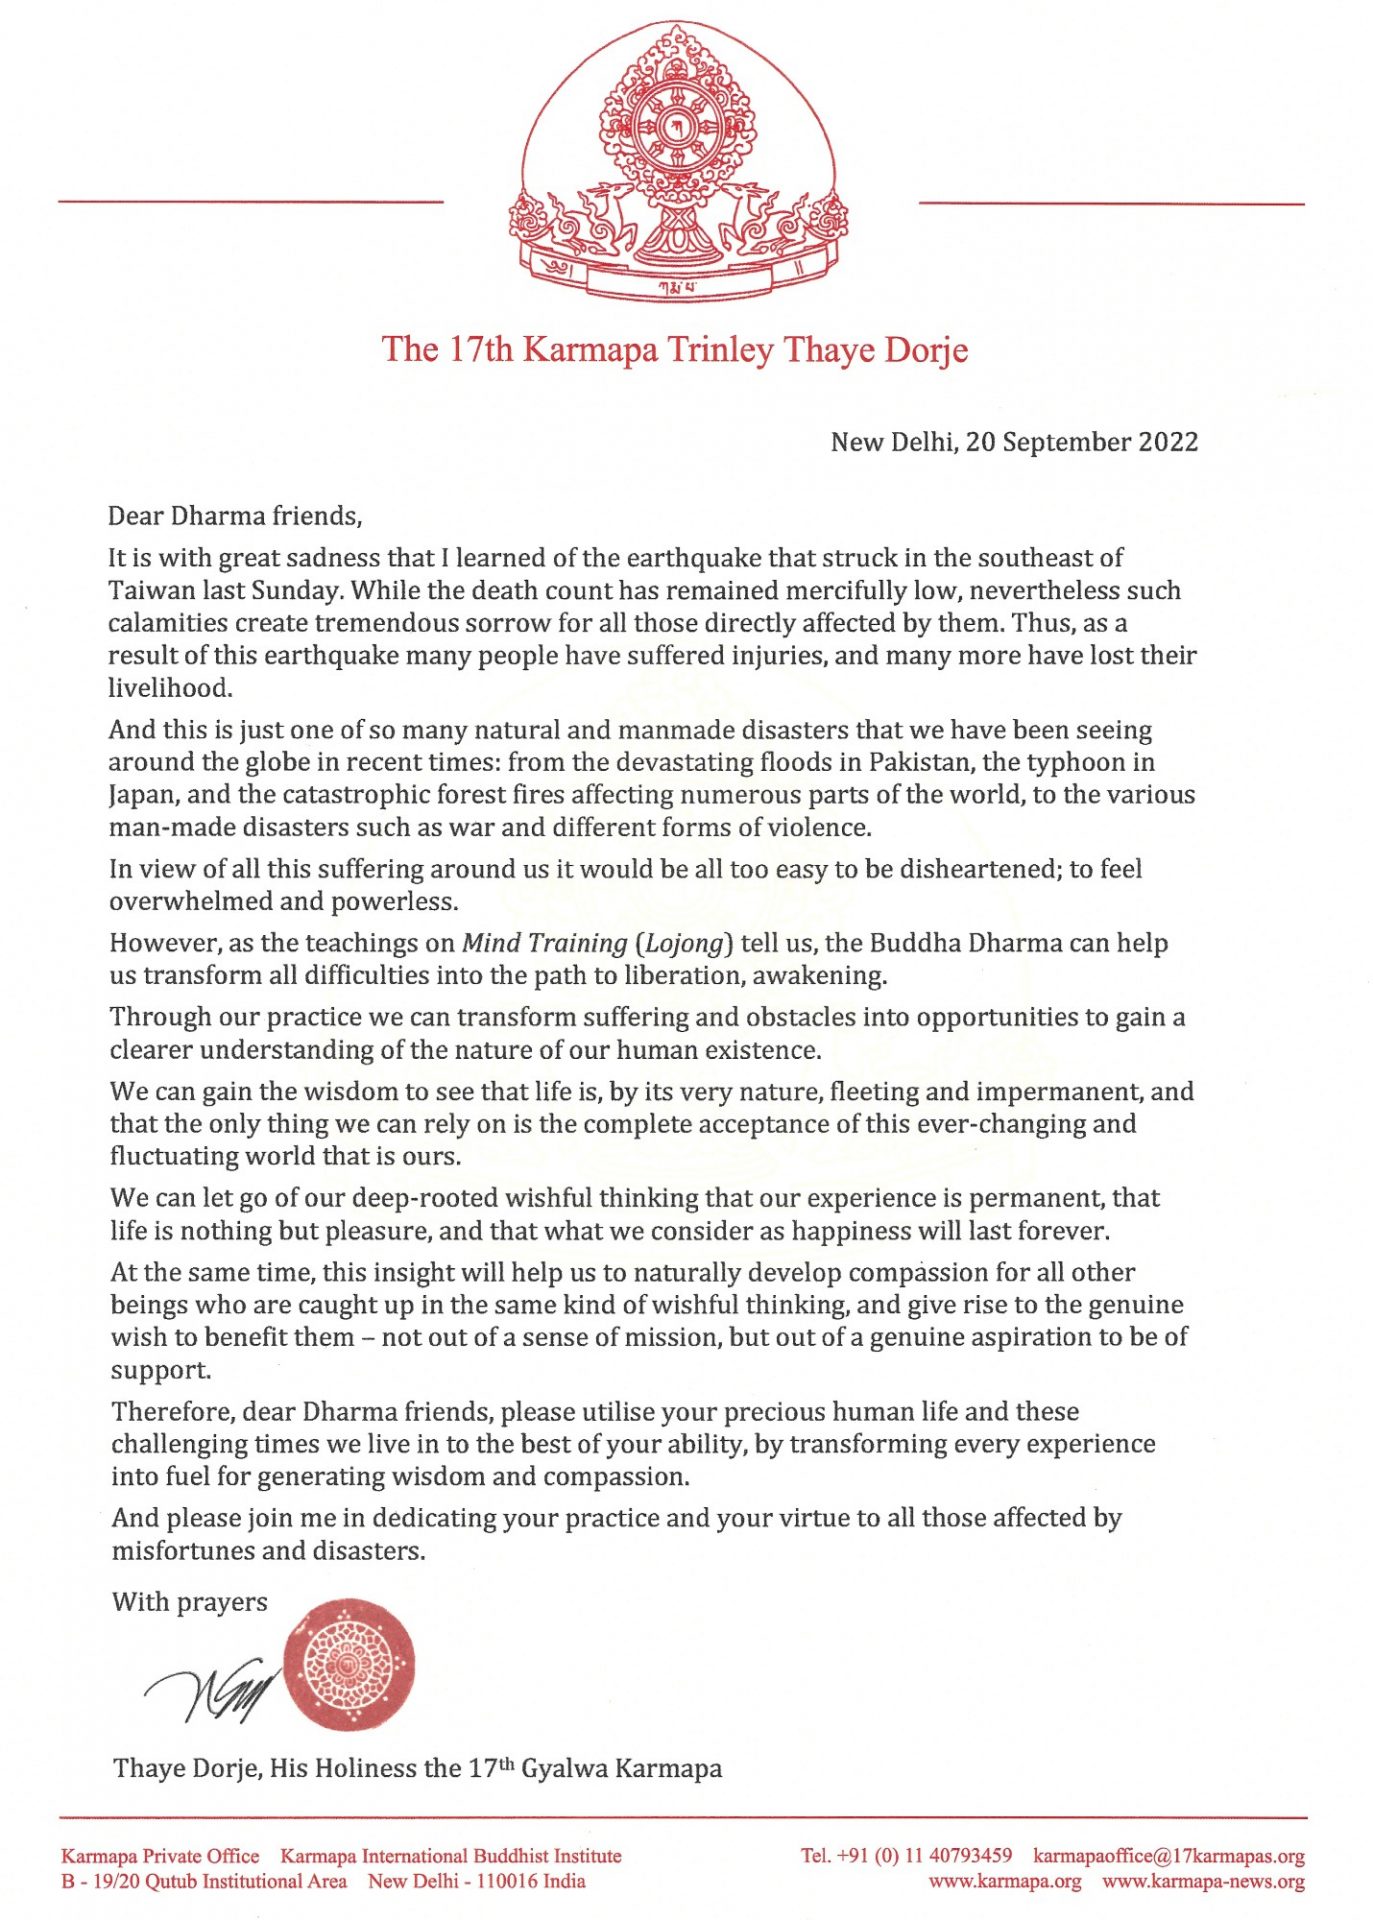 Letter by Thaye Dorje, His Holiness the 17th Gyalwa Karmapa, on the recent earthquake in Taiwan